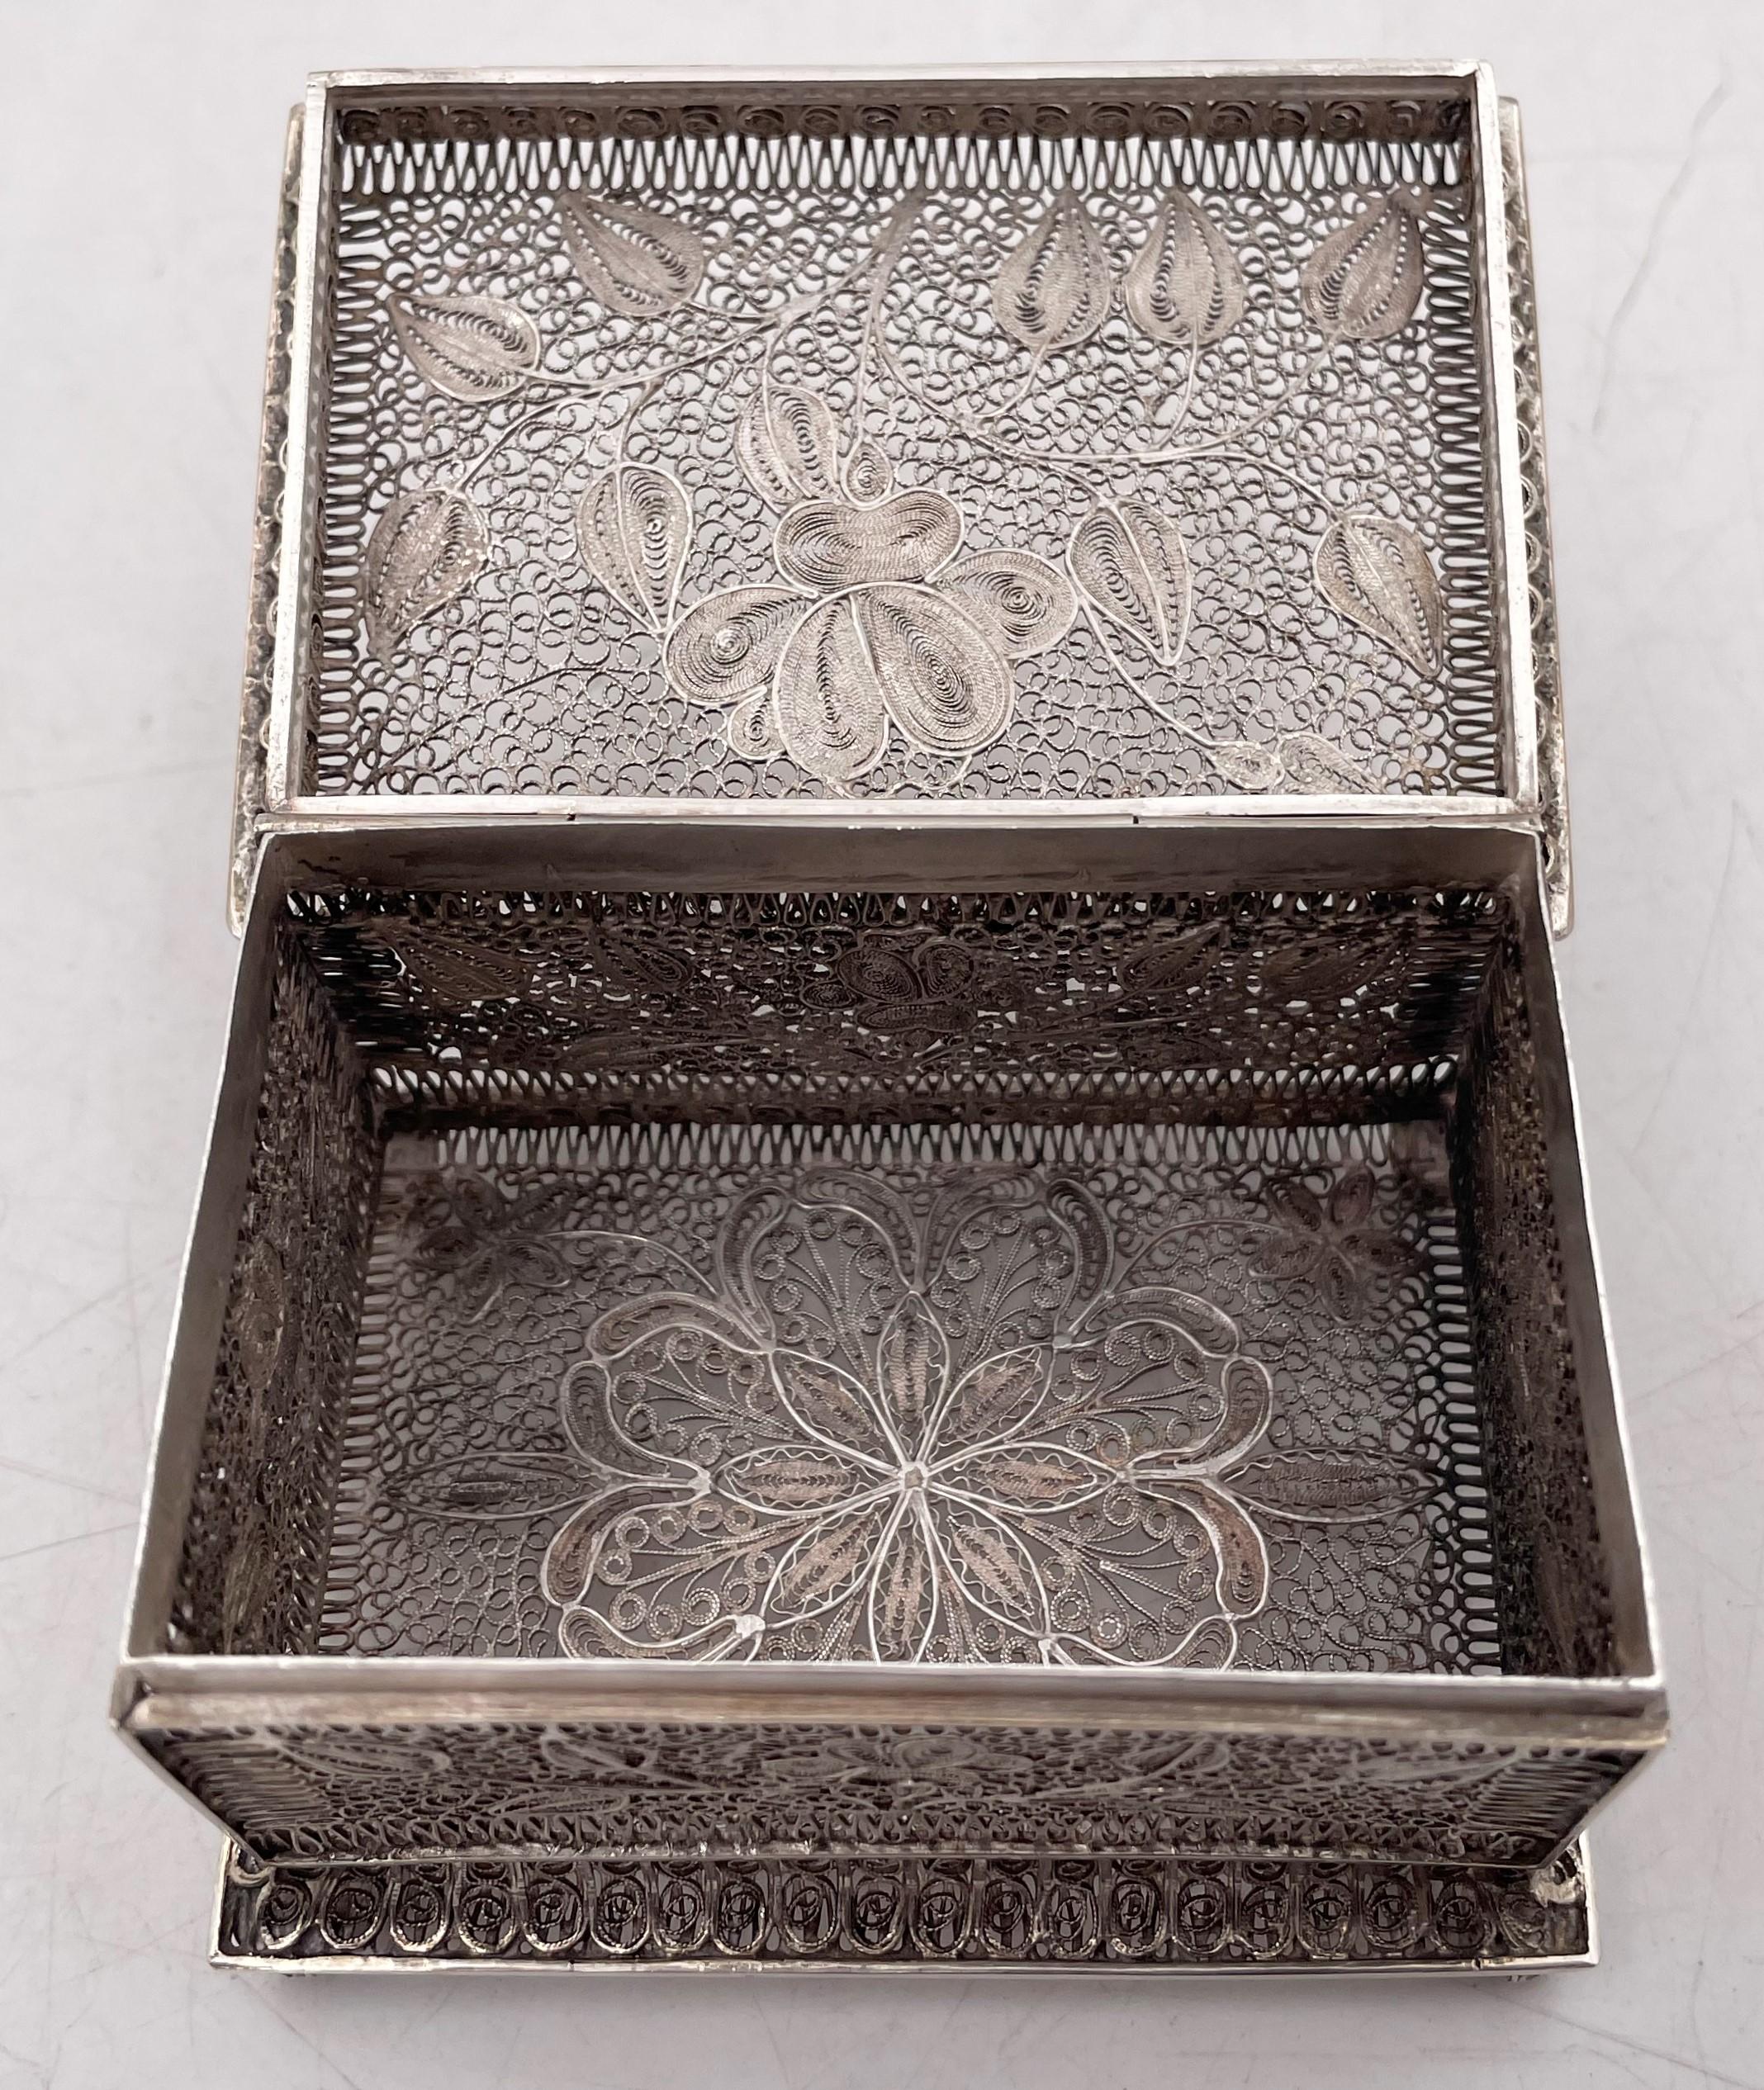 Asian Filigree Early 20th Century Silver Box with Floral Motifs For Sale